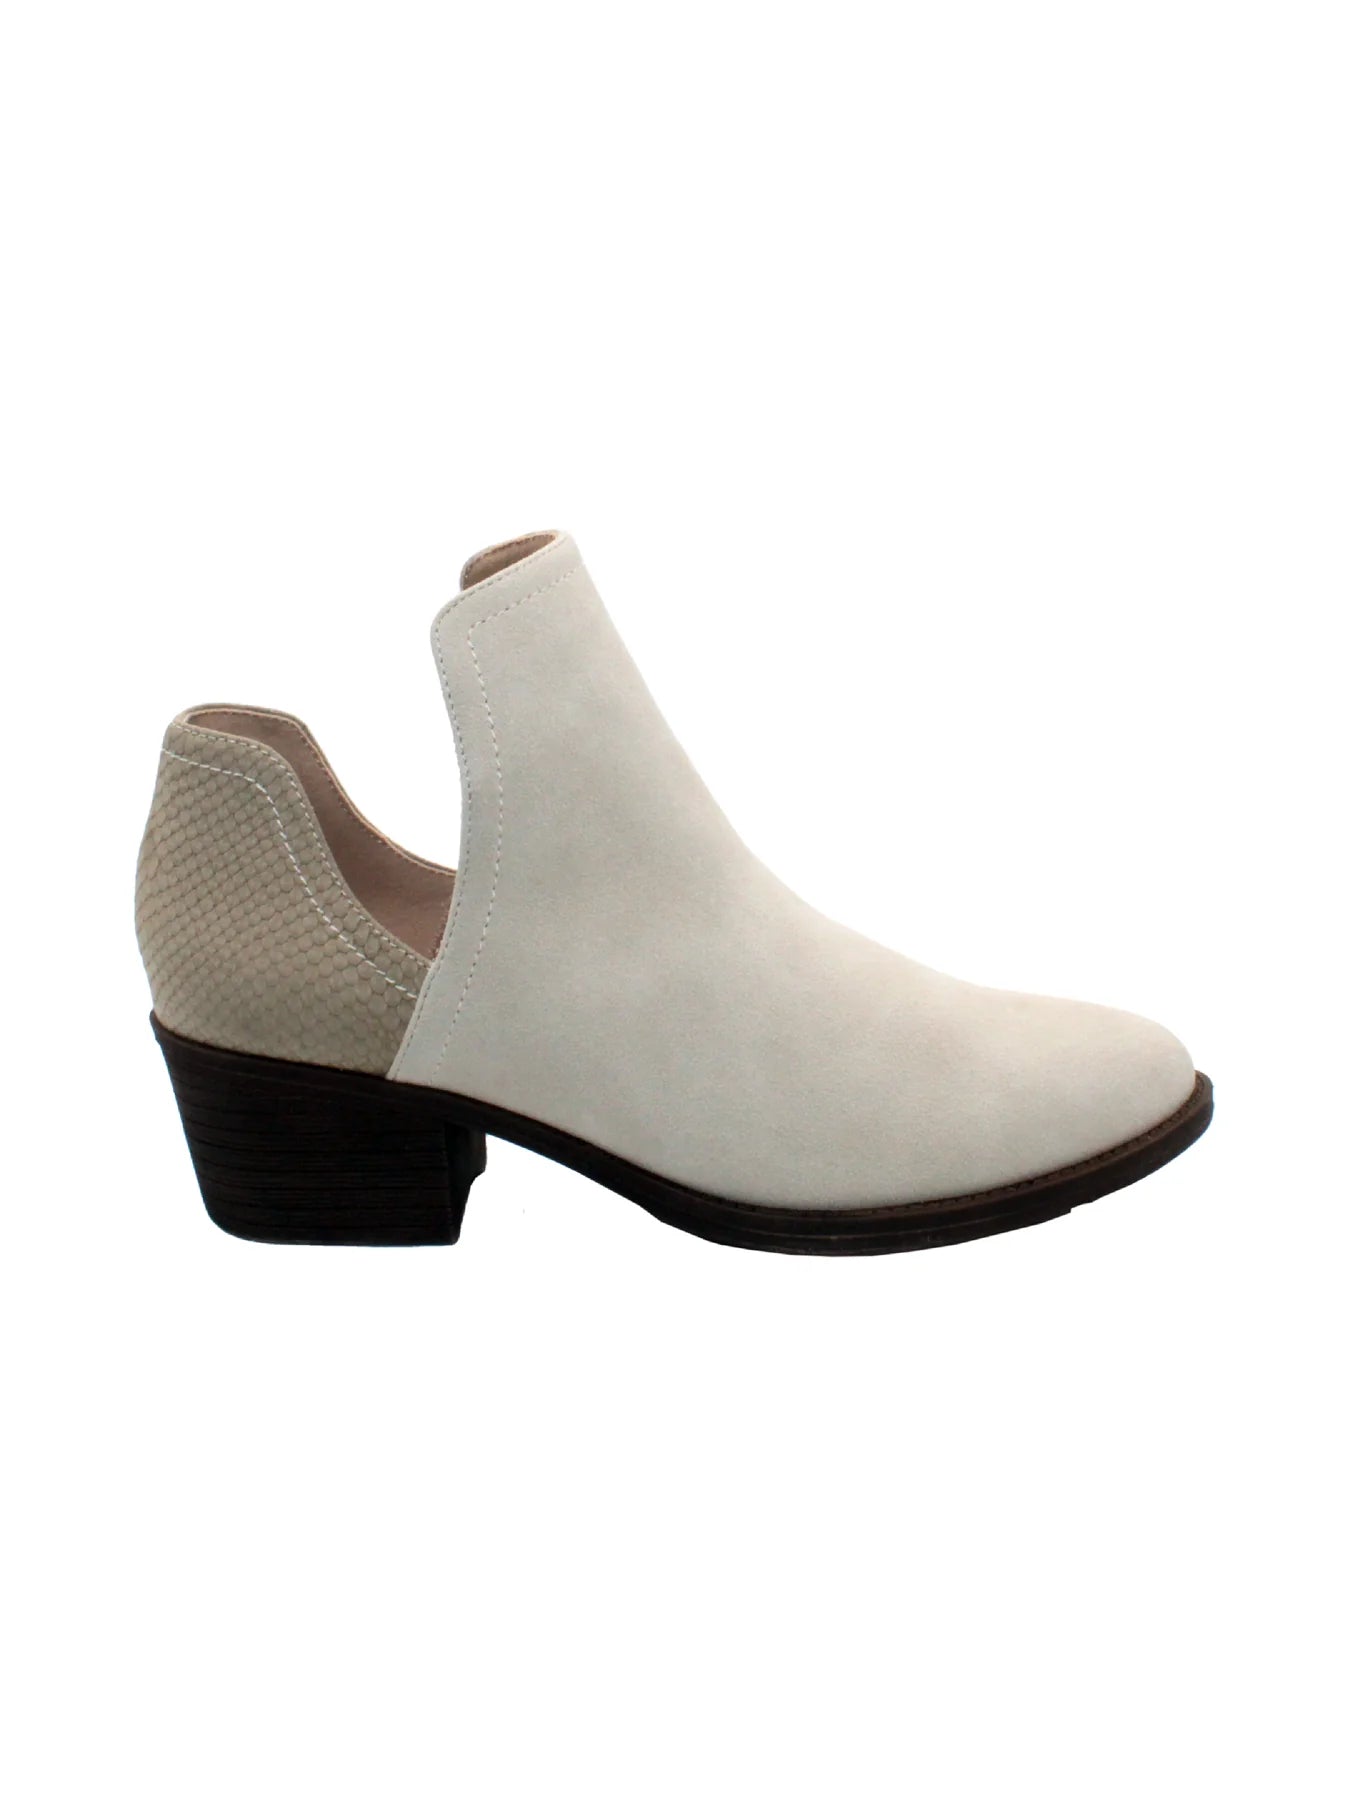 Chronicle faux suede bootie